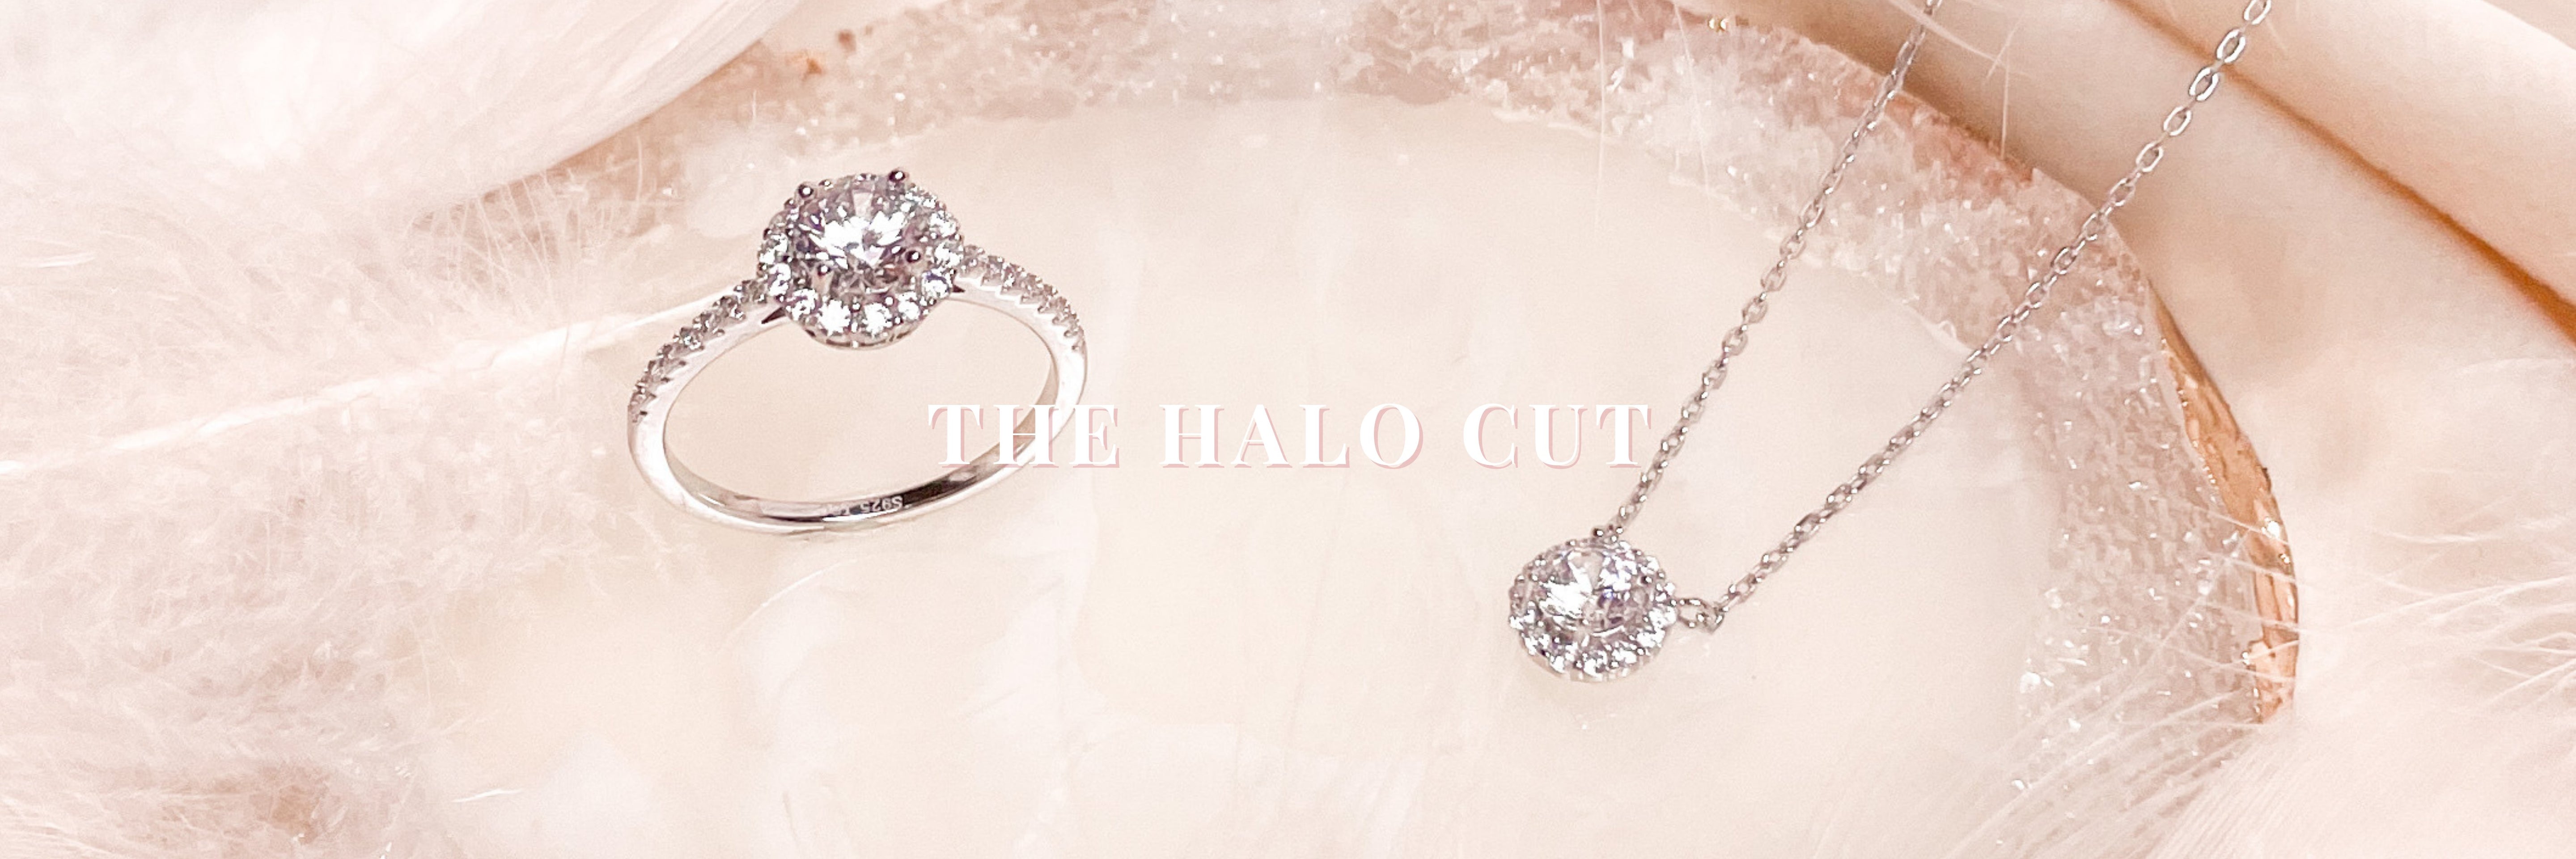 Halo Cut, Diamond Simulant, The Starry Co., Debbie Soon, Affordable Jewellery, 925 Silver, Hypoallergenic